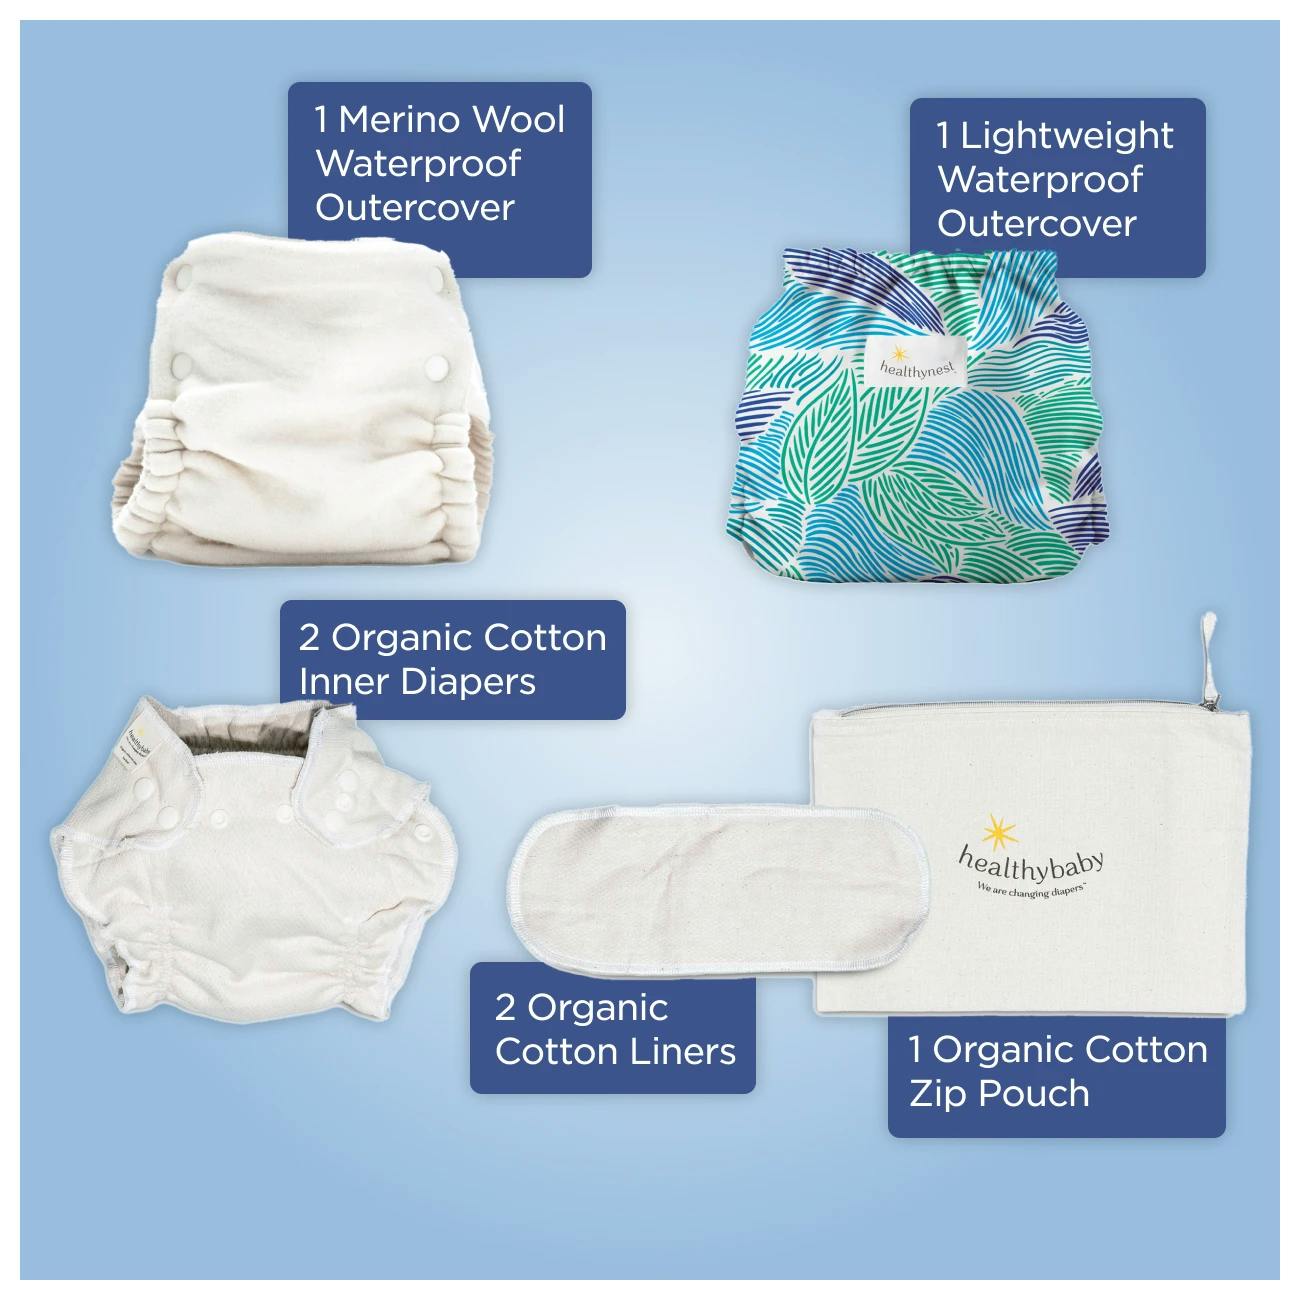 Our Cloth Diaper - HealthyBaby